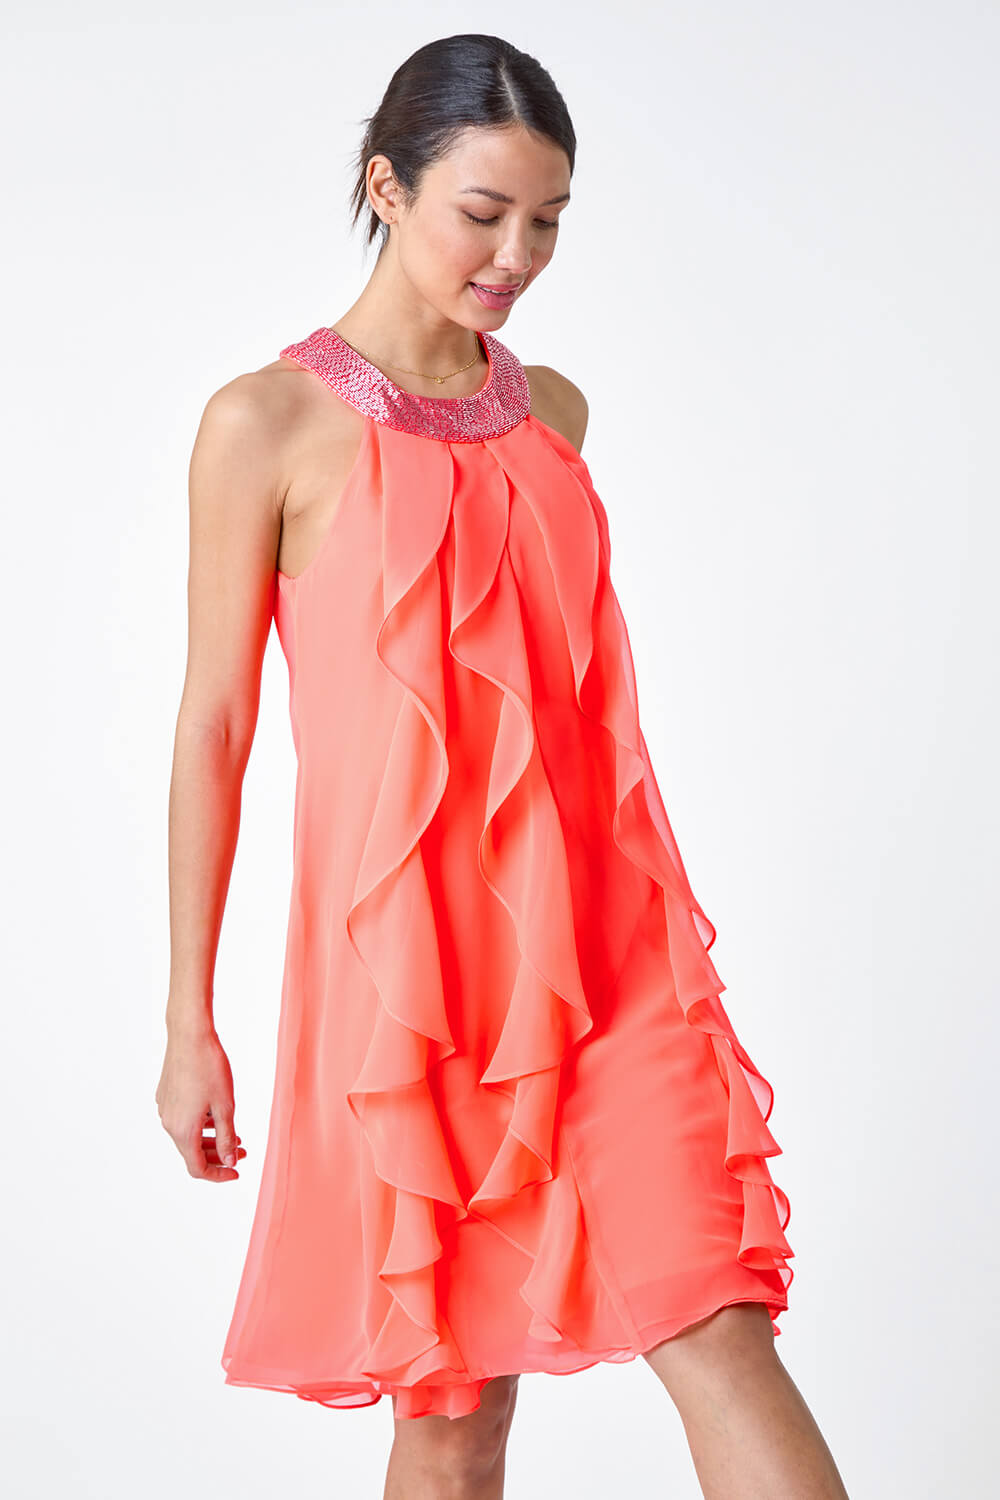 CORAL Embellished Collar Frilled Chiffon Dress, Image 2 of 5